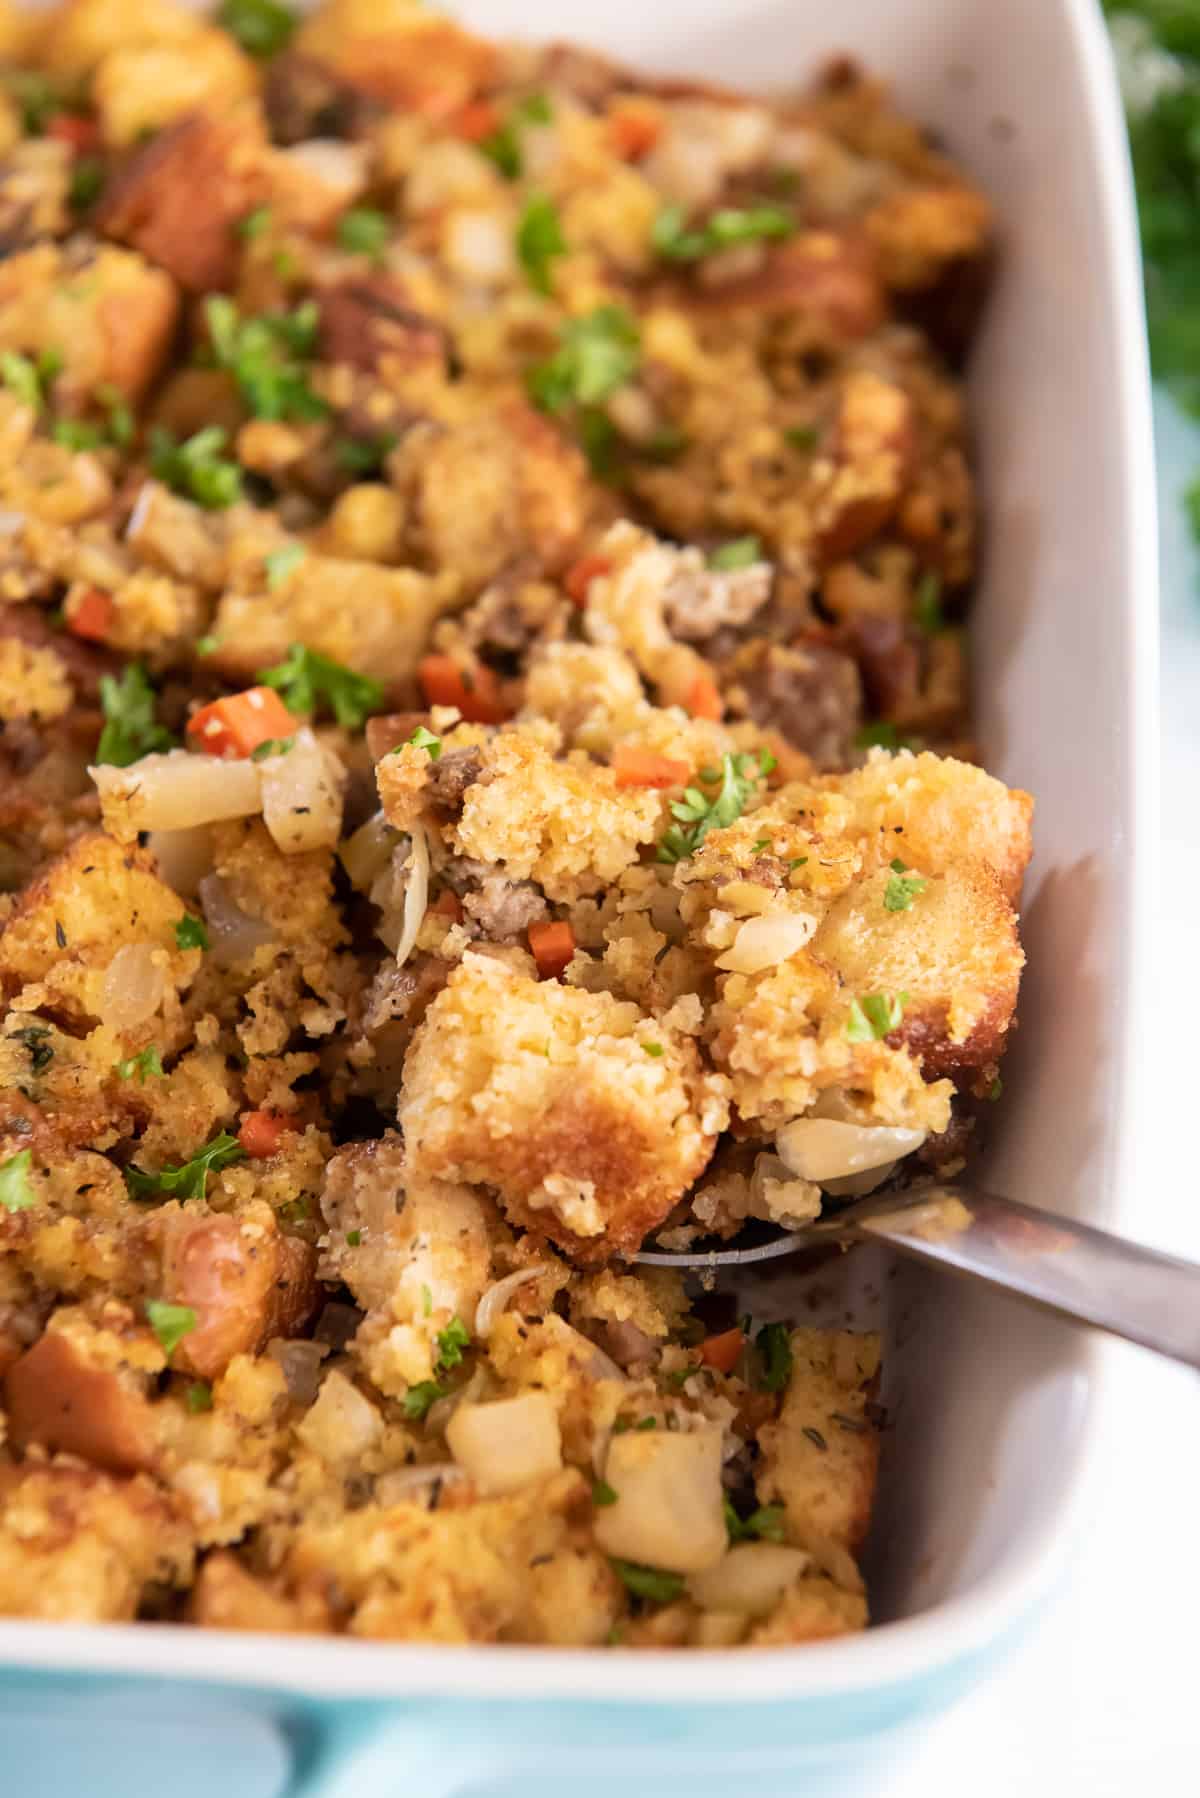 A spoon scooping up Jiffy cornbread stuffing from a baking dish.